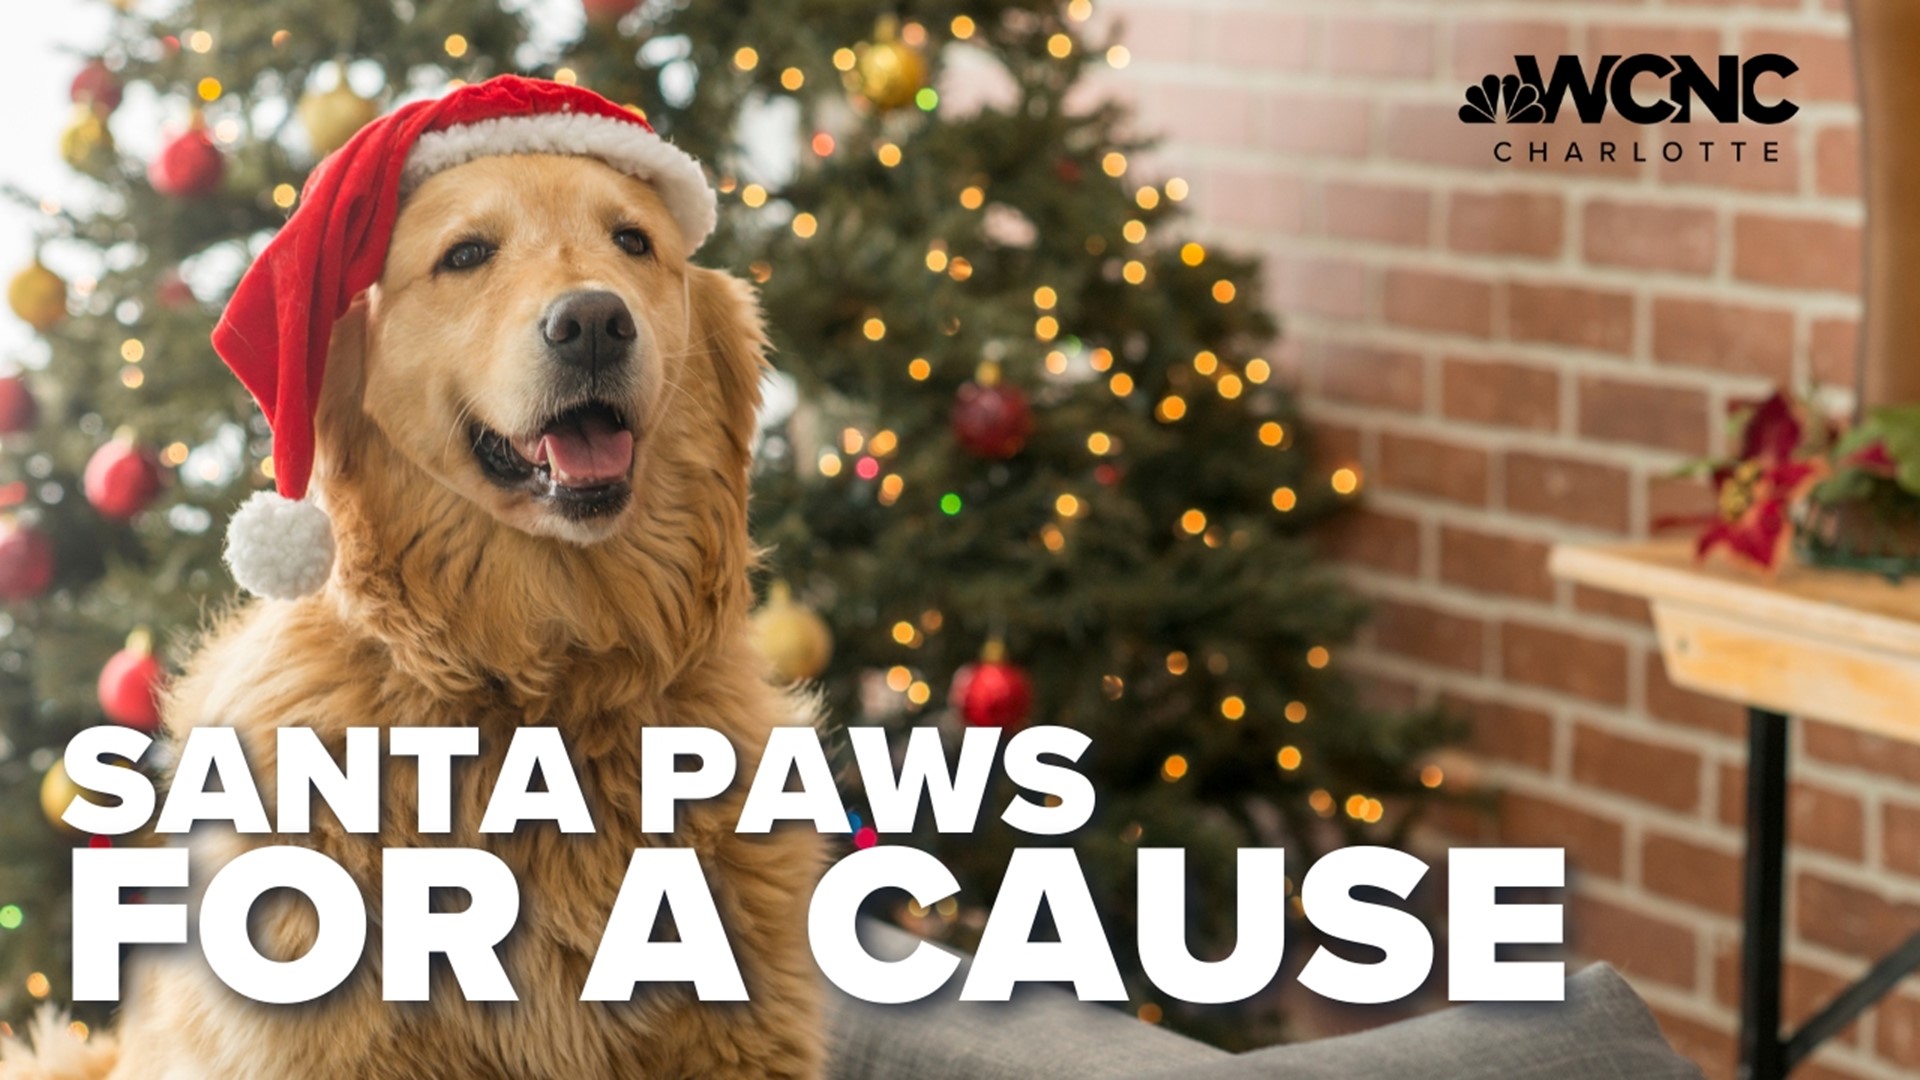 A holiday favorite benefiting our furry friends is back this weekend!